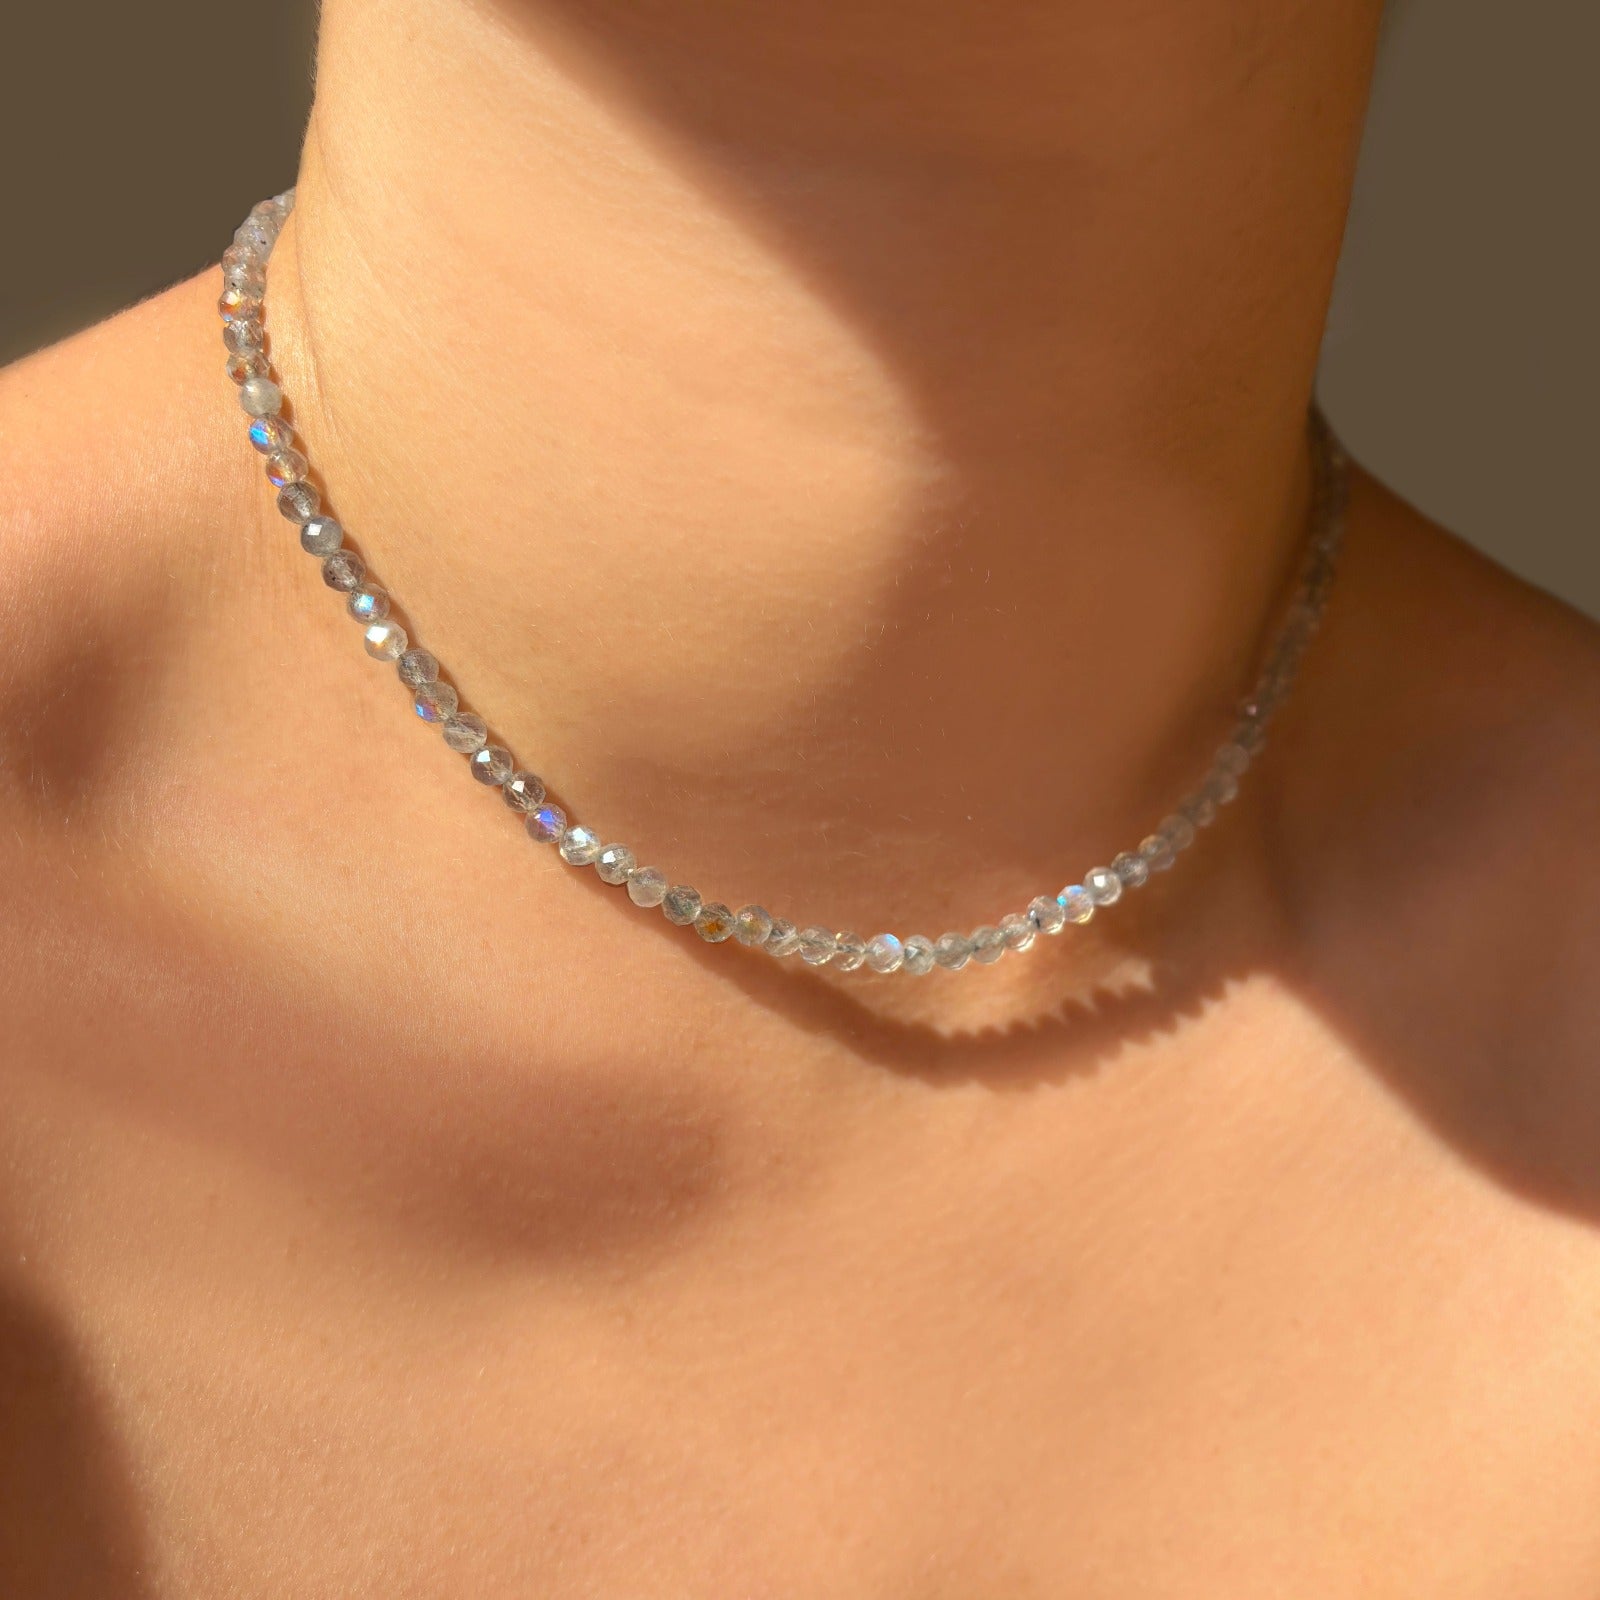 Shimmering beaded necklace made of 4mm faceted rounded opals in shades of clear white on a gold linking oval clasp.